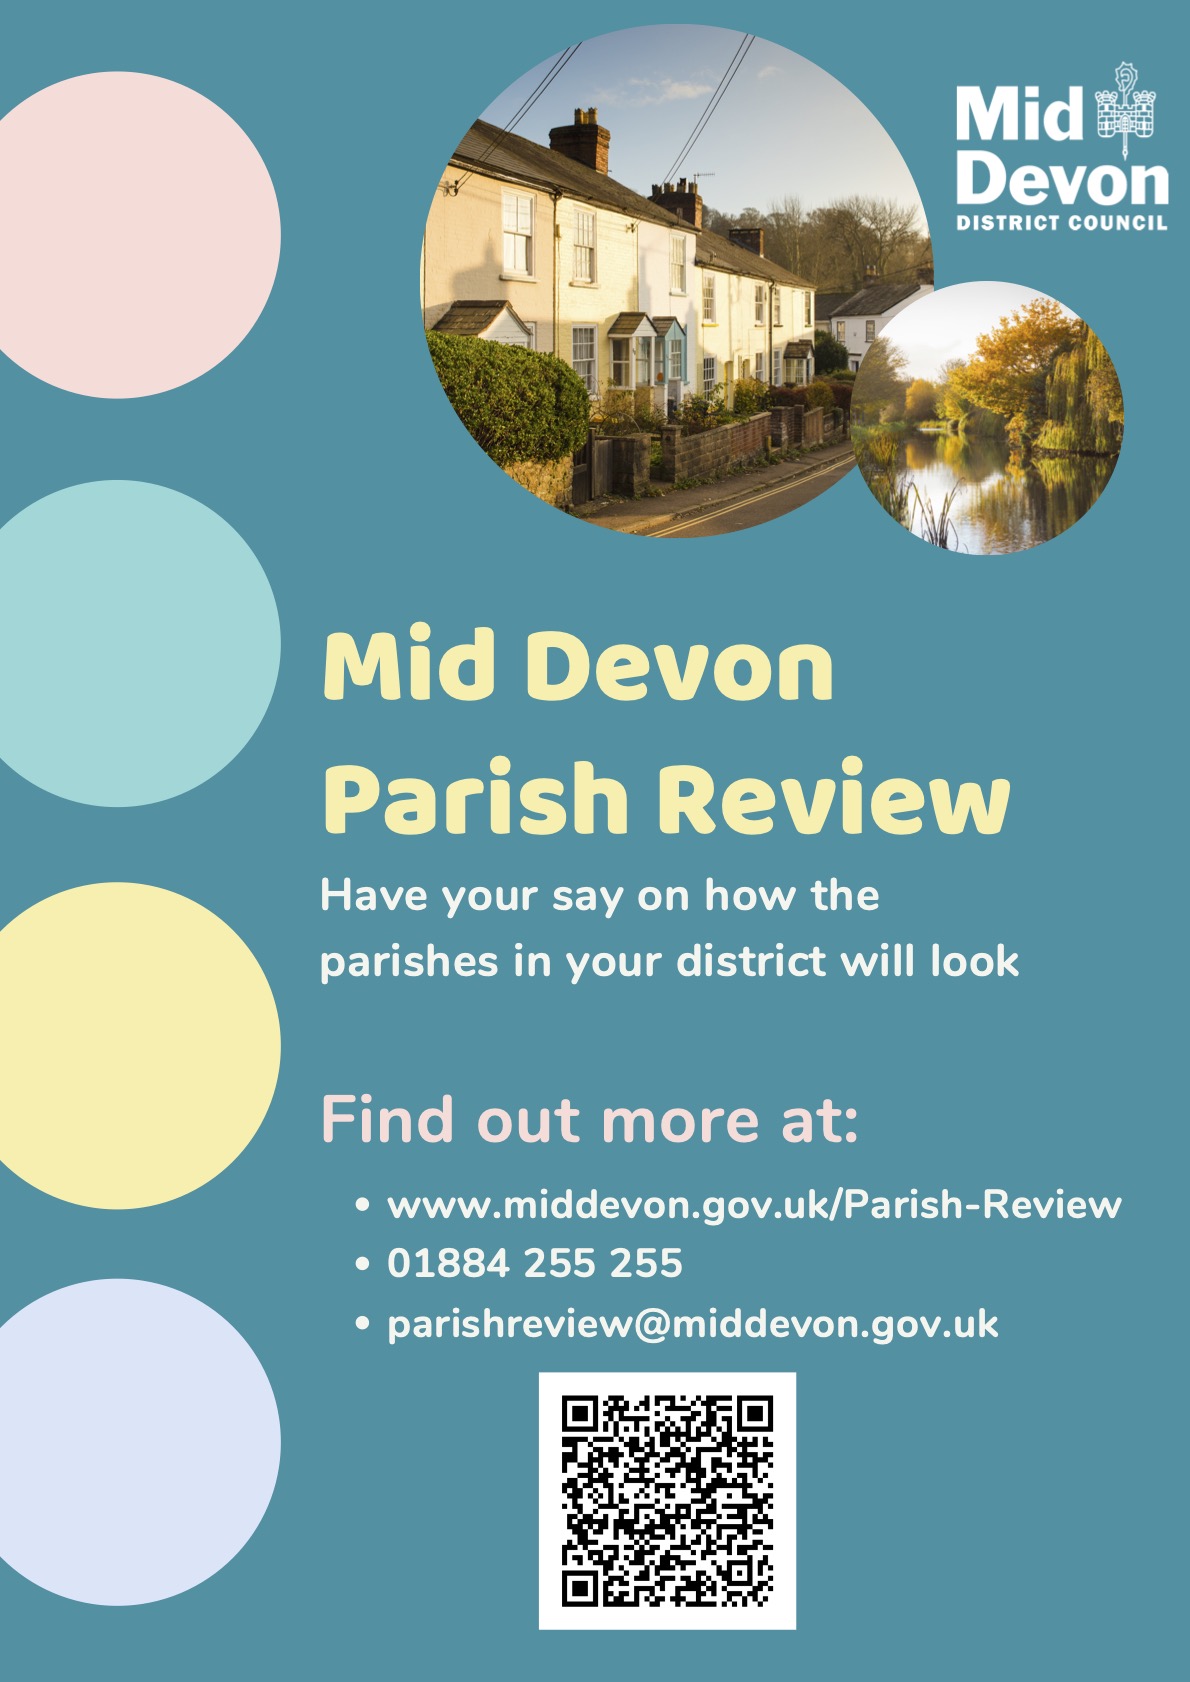 Parish Review Launched in Mid Devon